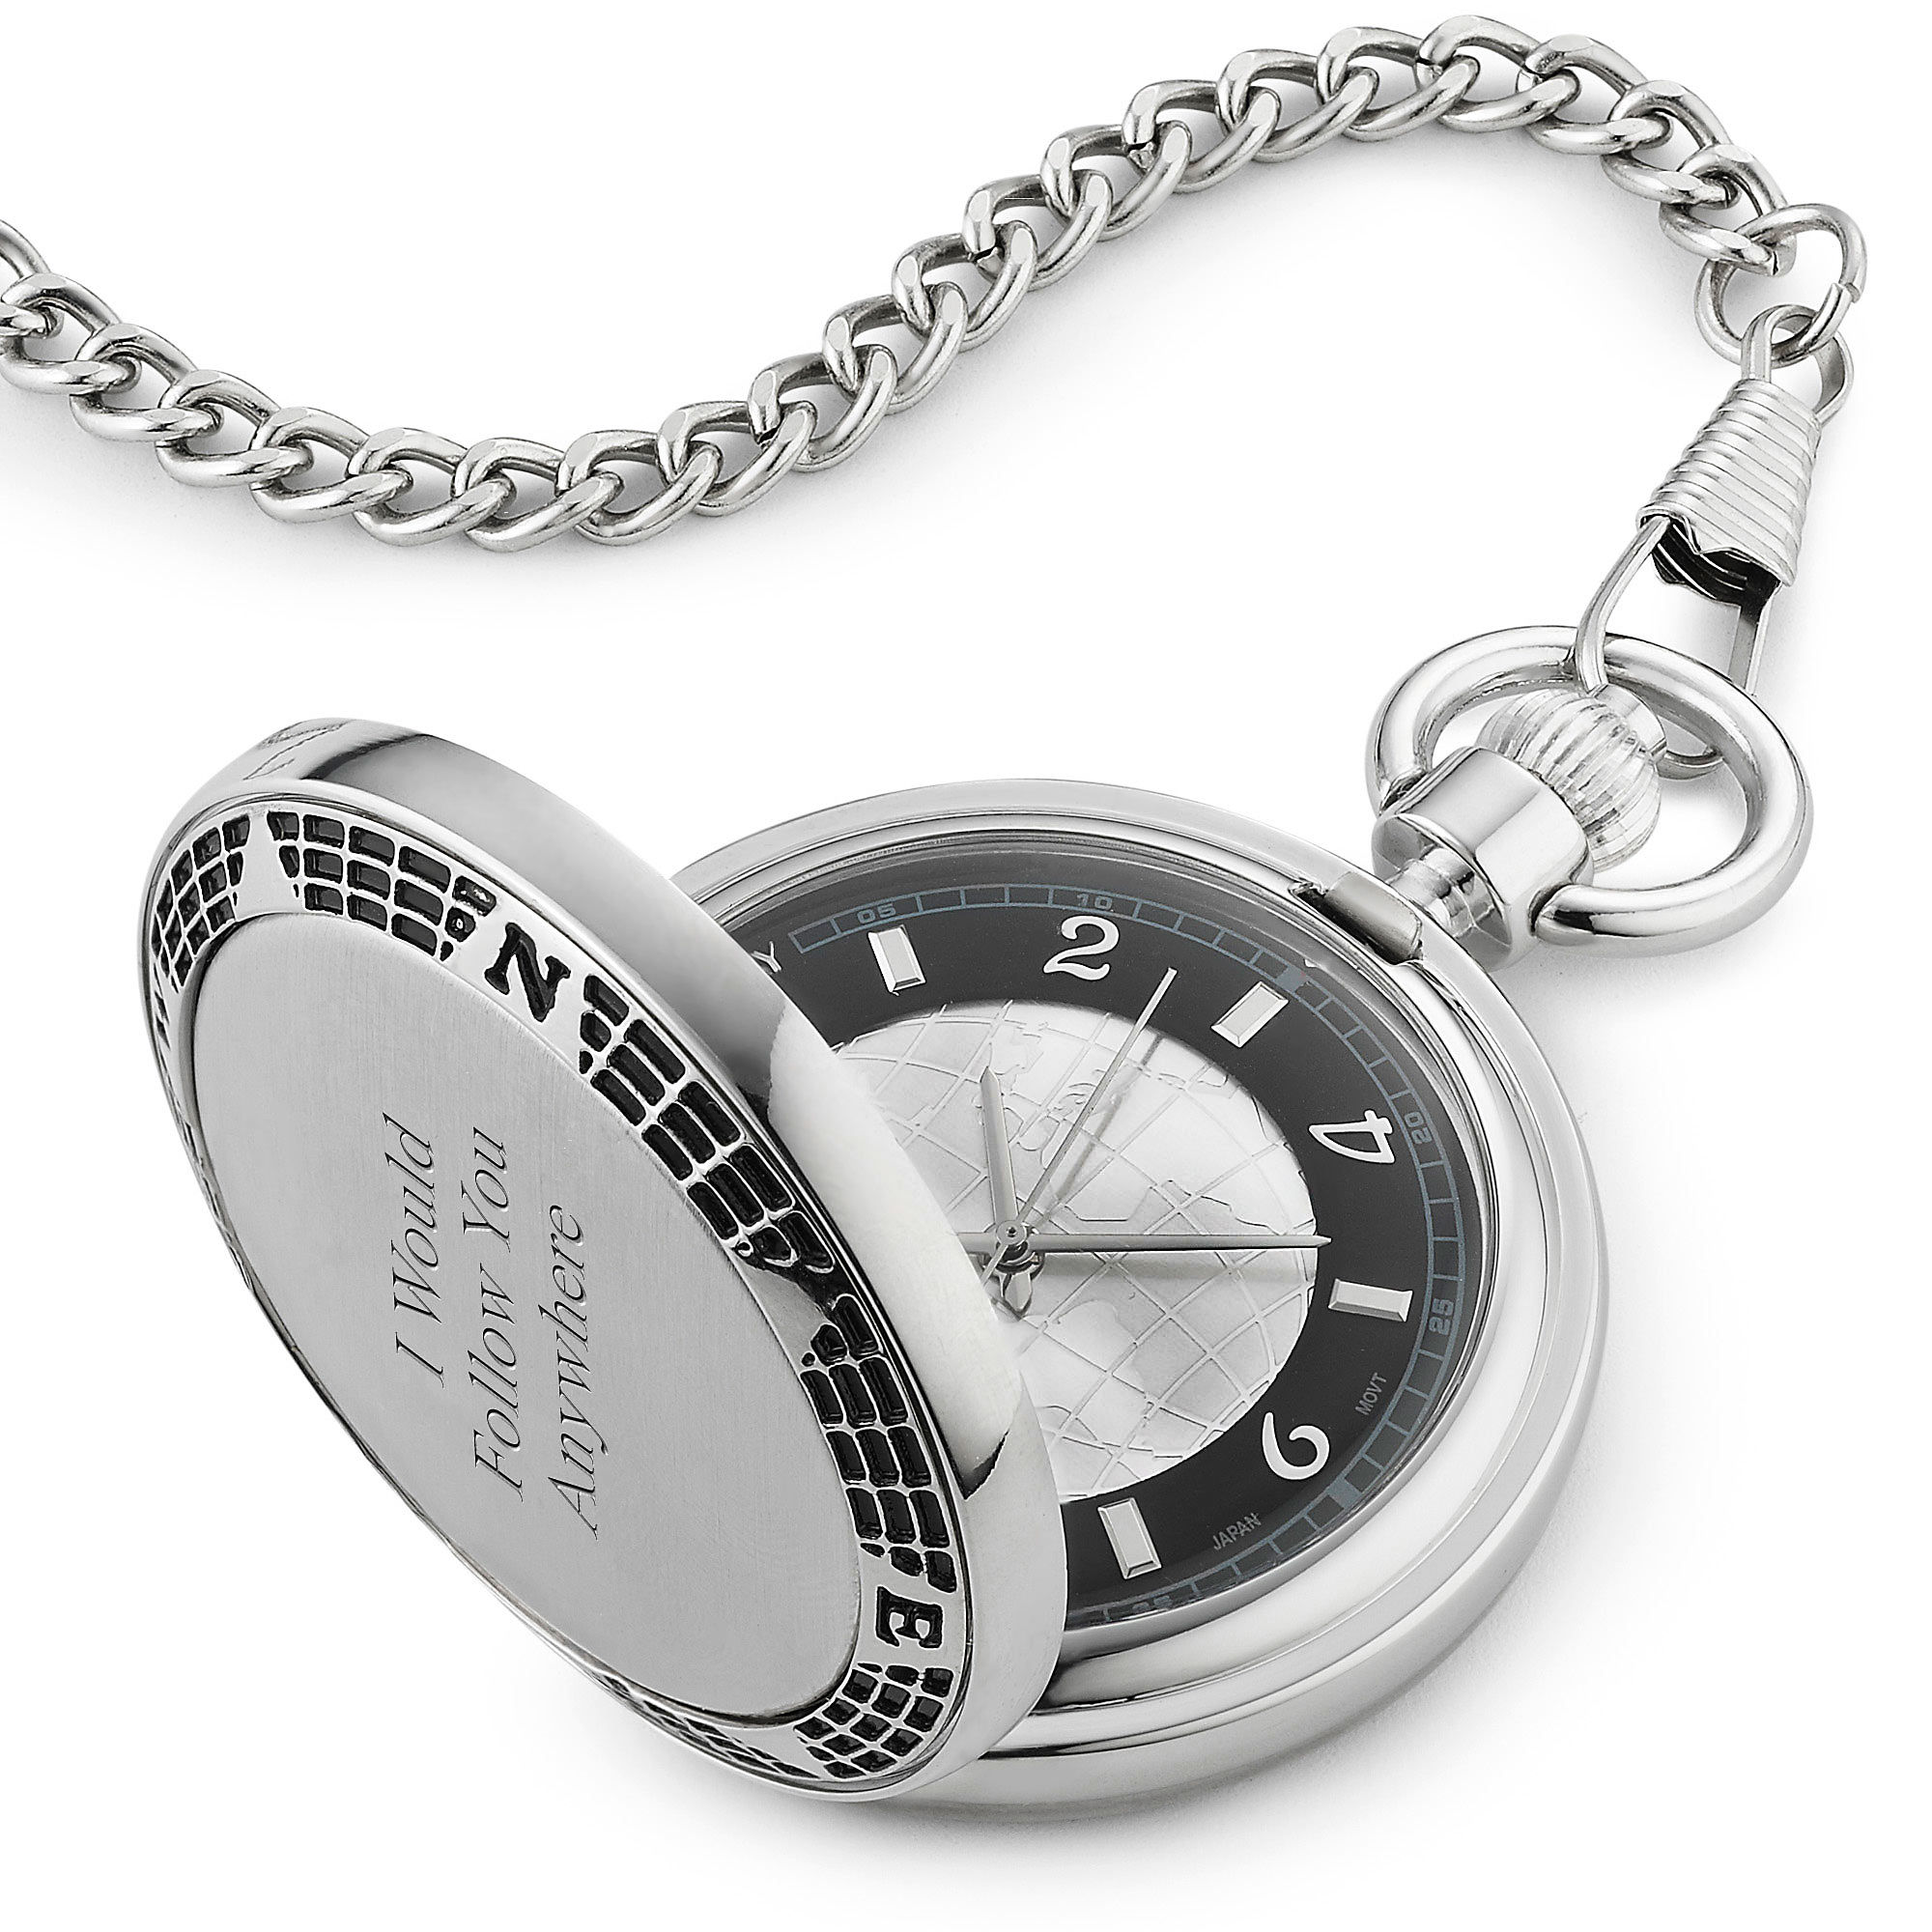 9 Pocket watches chains and engraving included box set of 9 personalized set Custom engraved wedding gift Boxes 